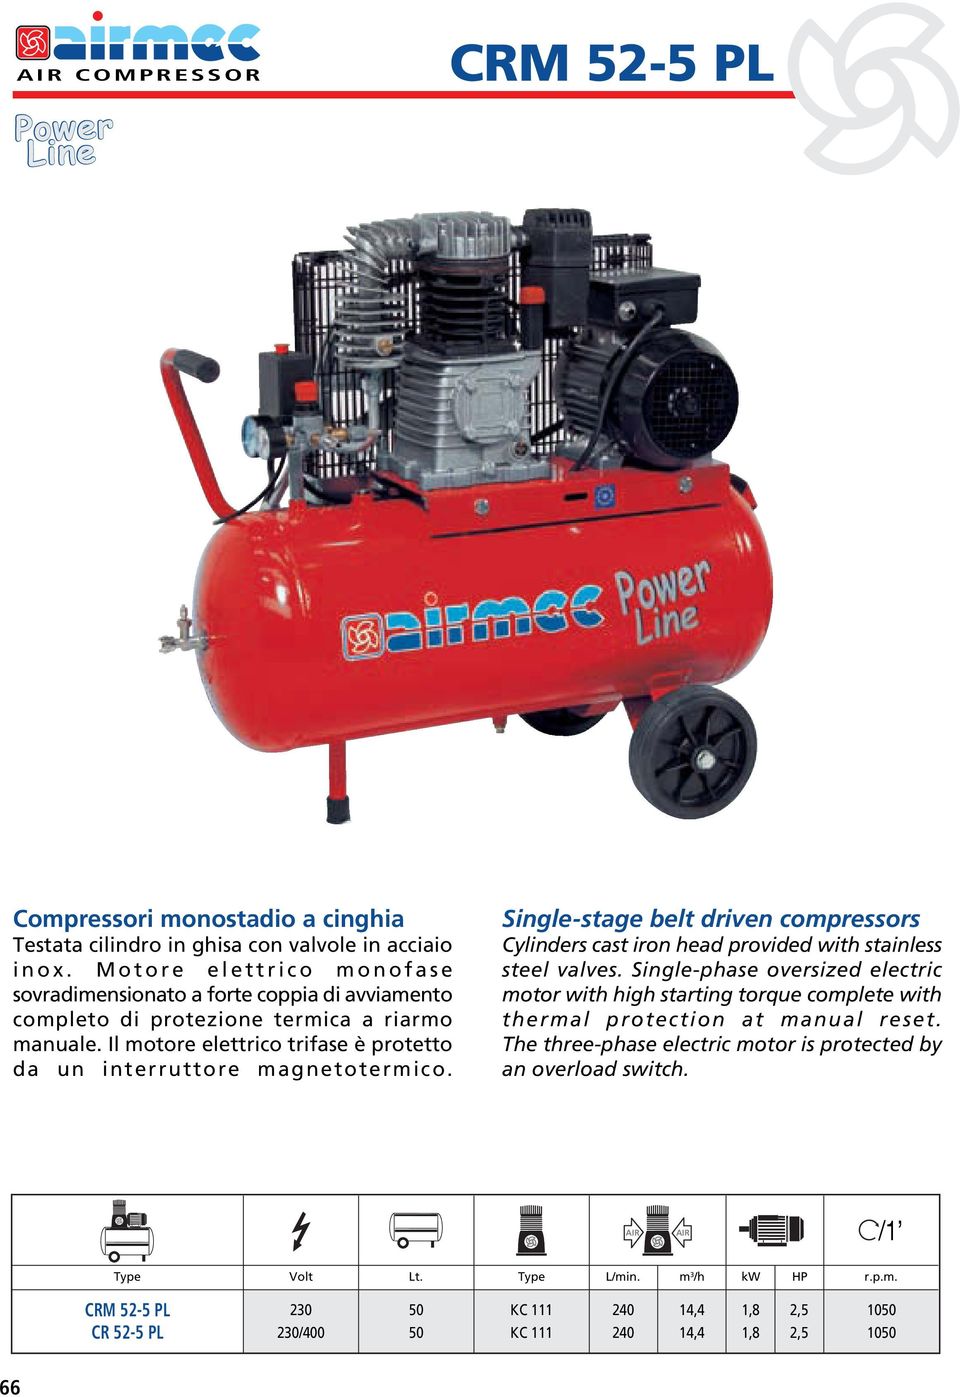 Il motore elettrico trifase è protetto da un interruttore magnetotermico. Single-stage belt driven compressors Cylinders cast iron head provided with stainless steel valves.